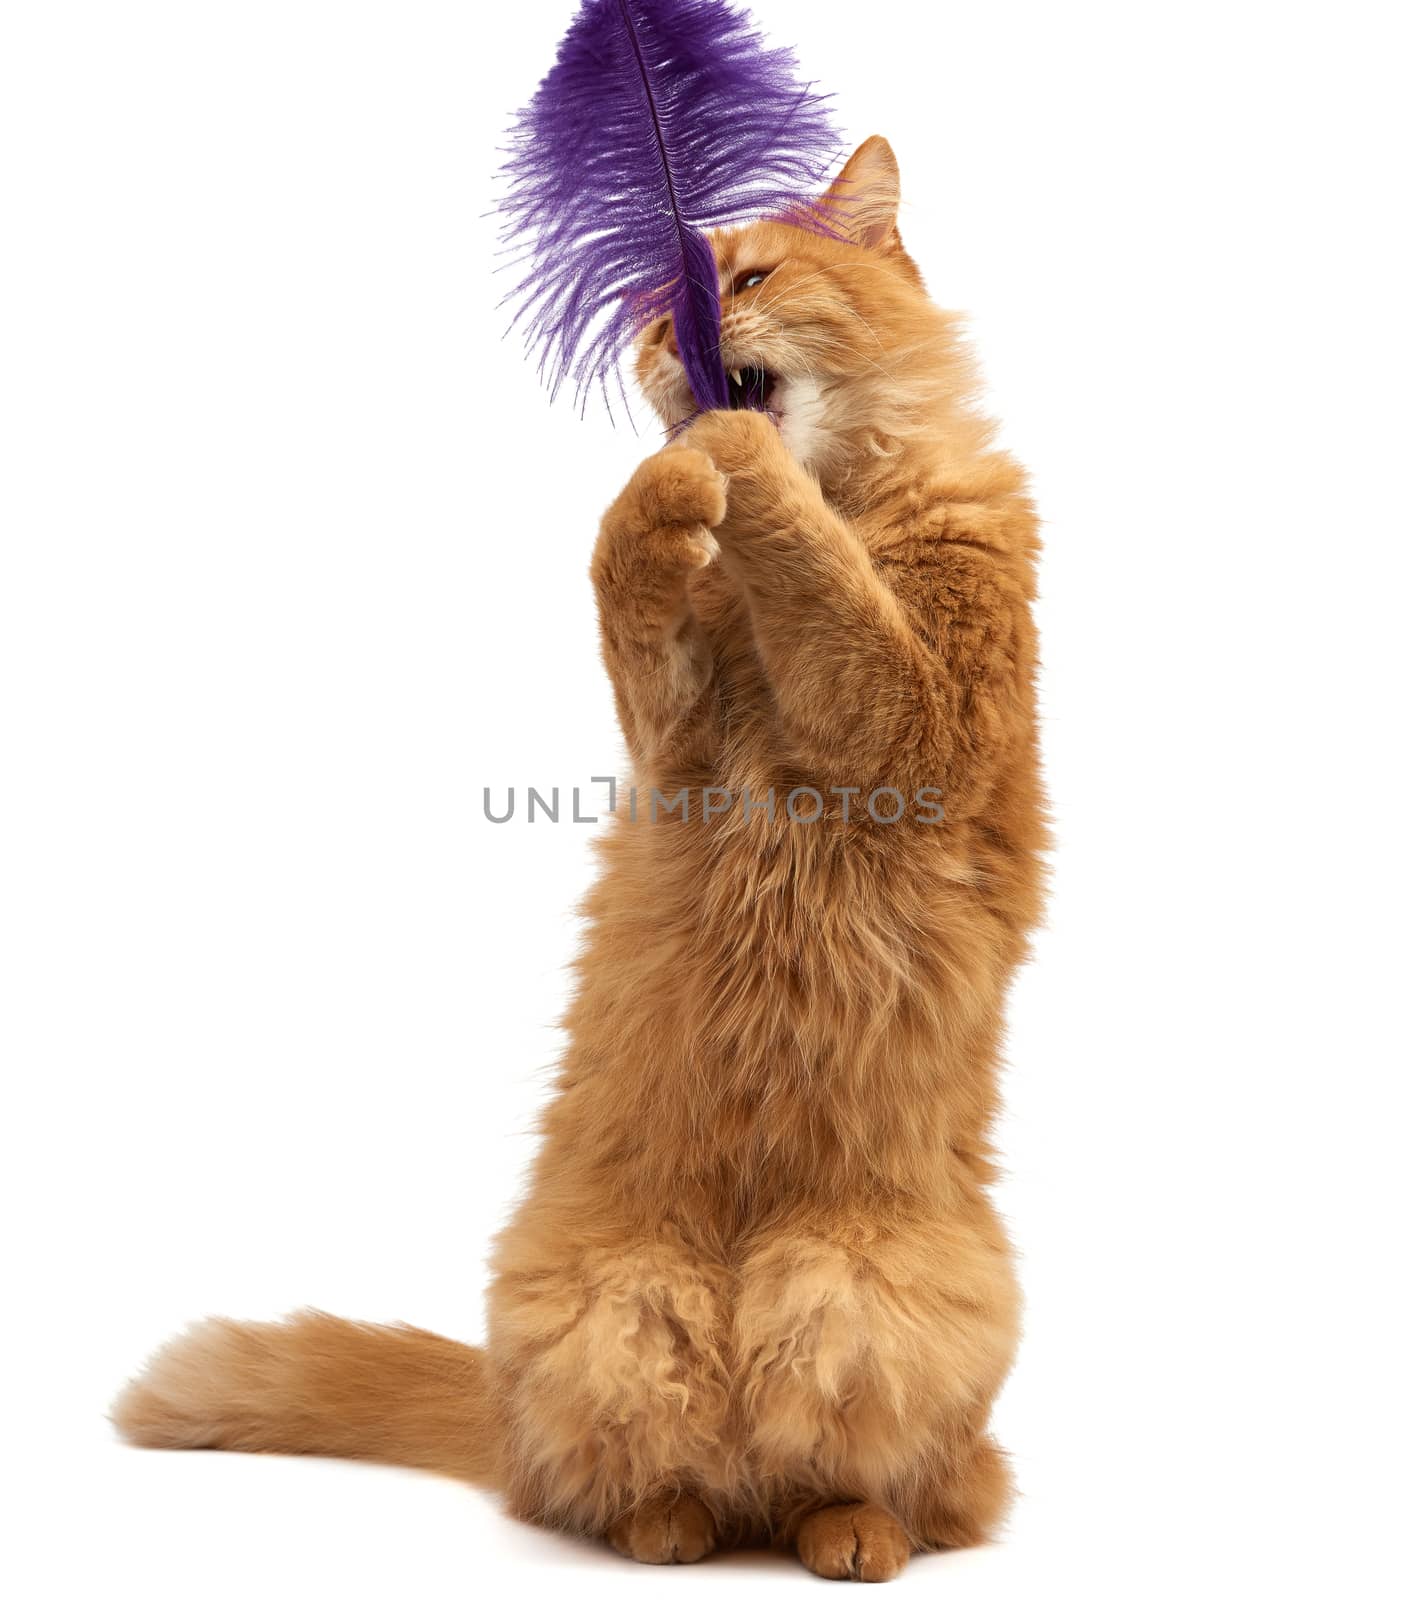 adult ginger fluffy cat plays with a purple feather on a white background, funny, cute animal